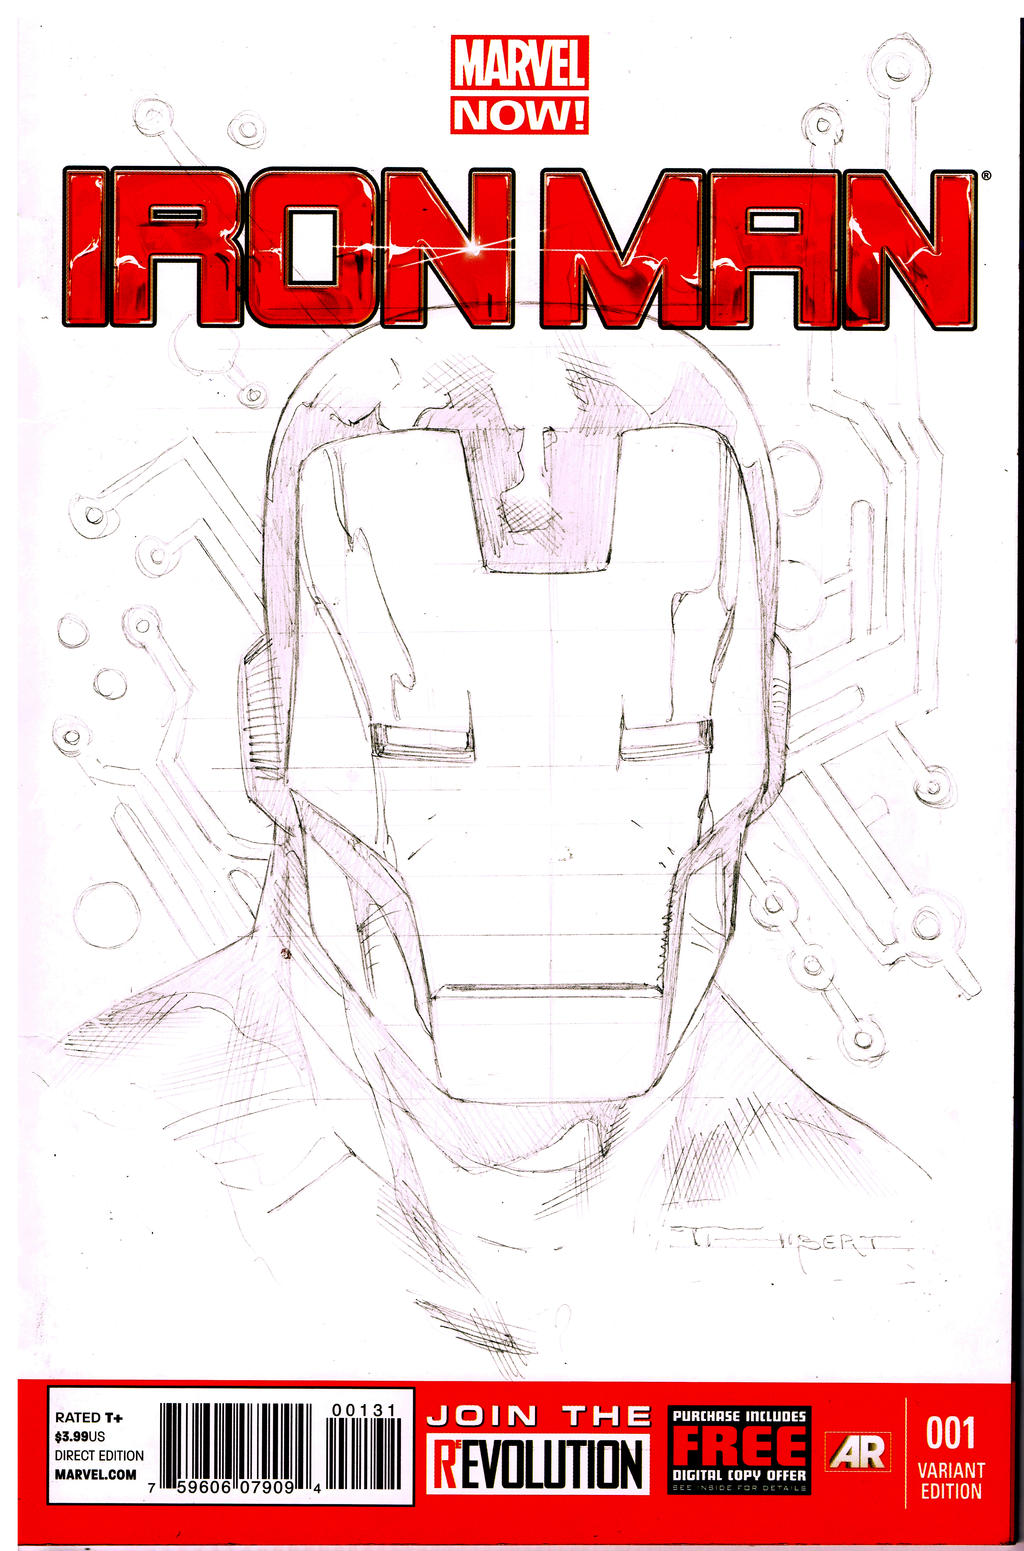 WIP Ironman sketch cover